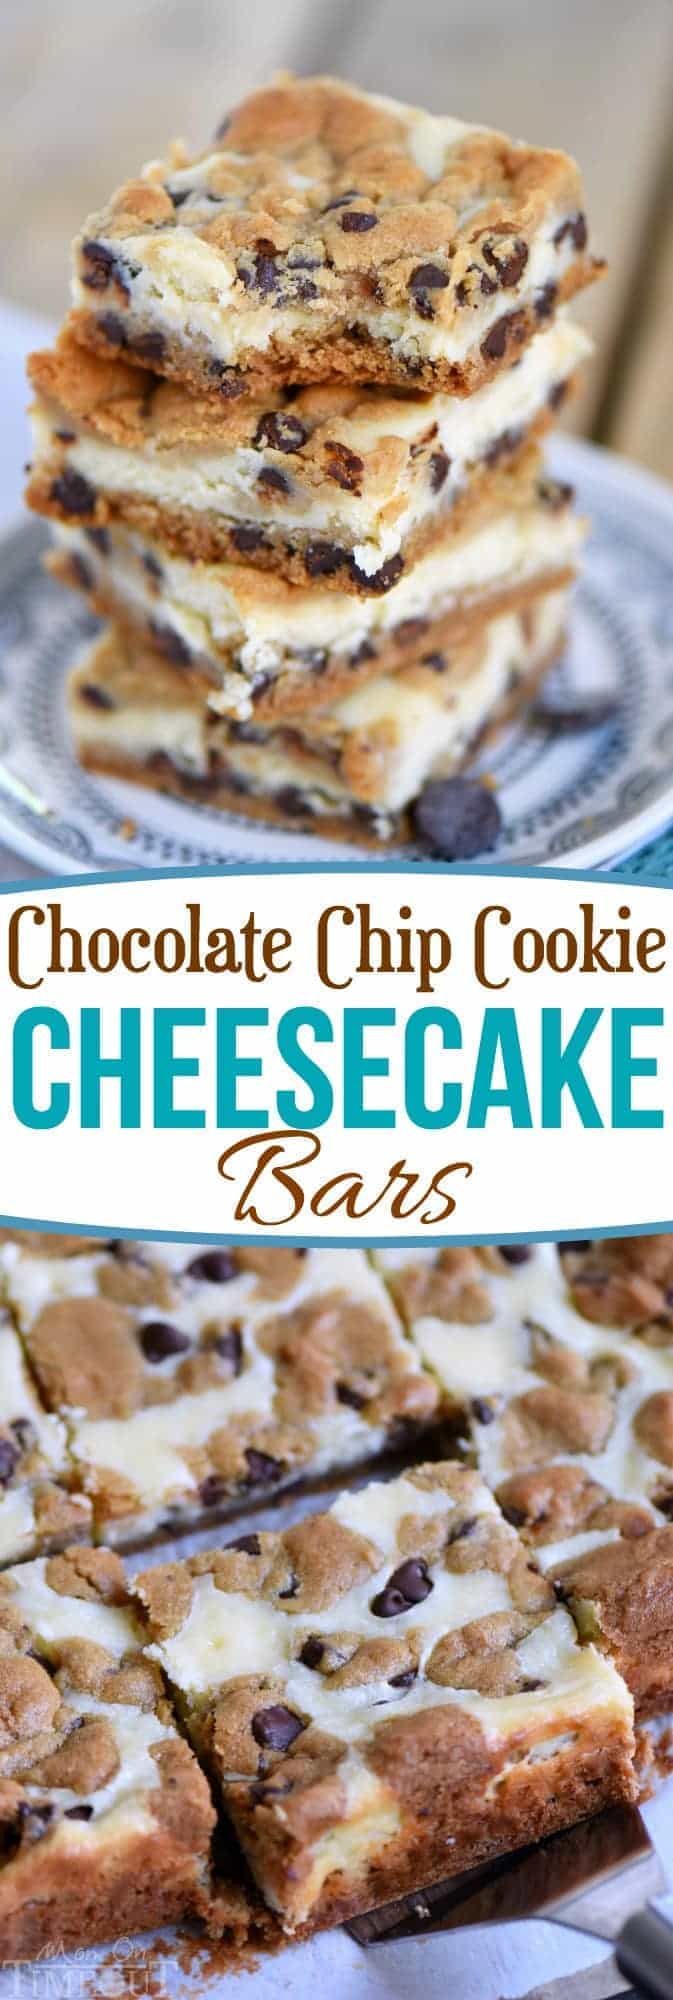 chocolate-chip-cheesecake-cookie-bars-collage